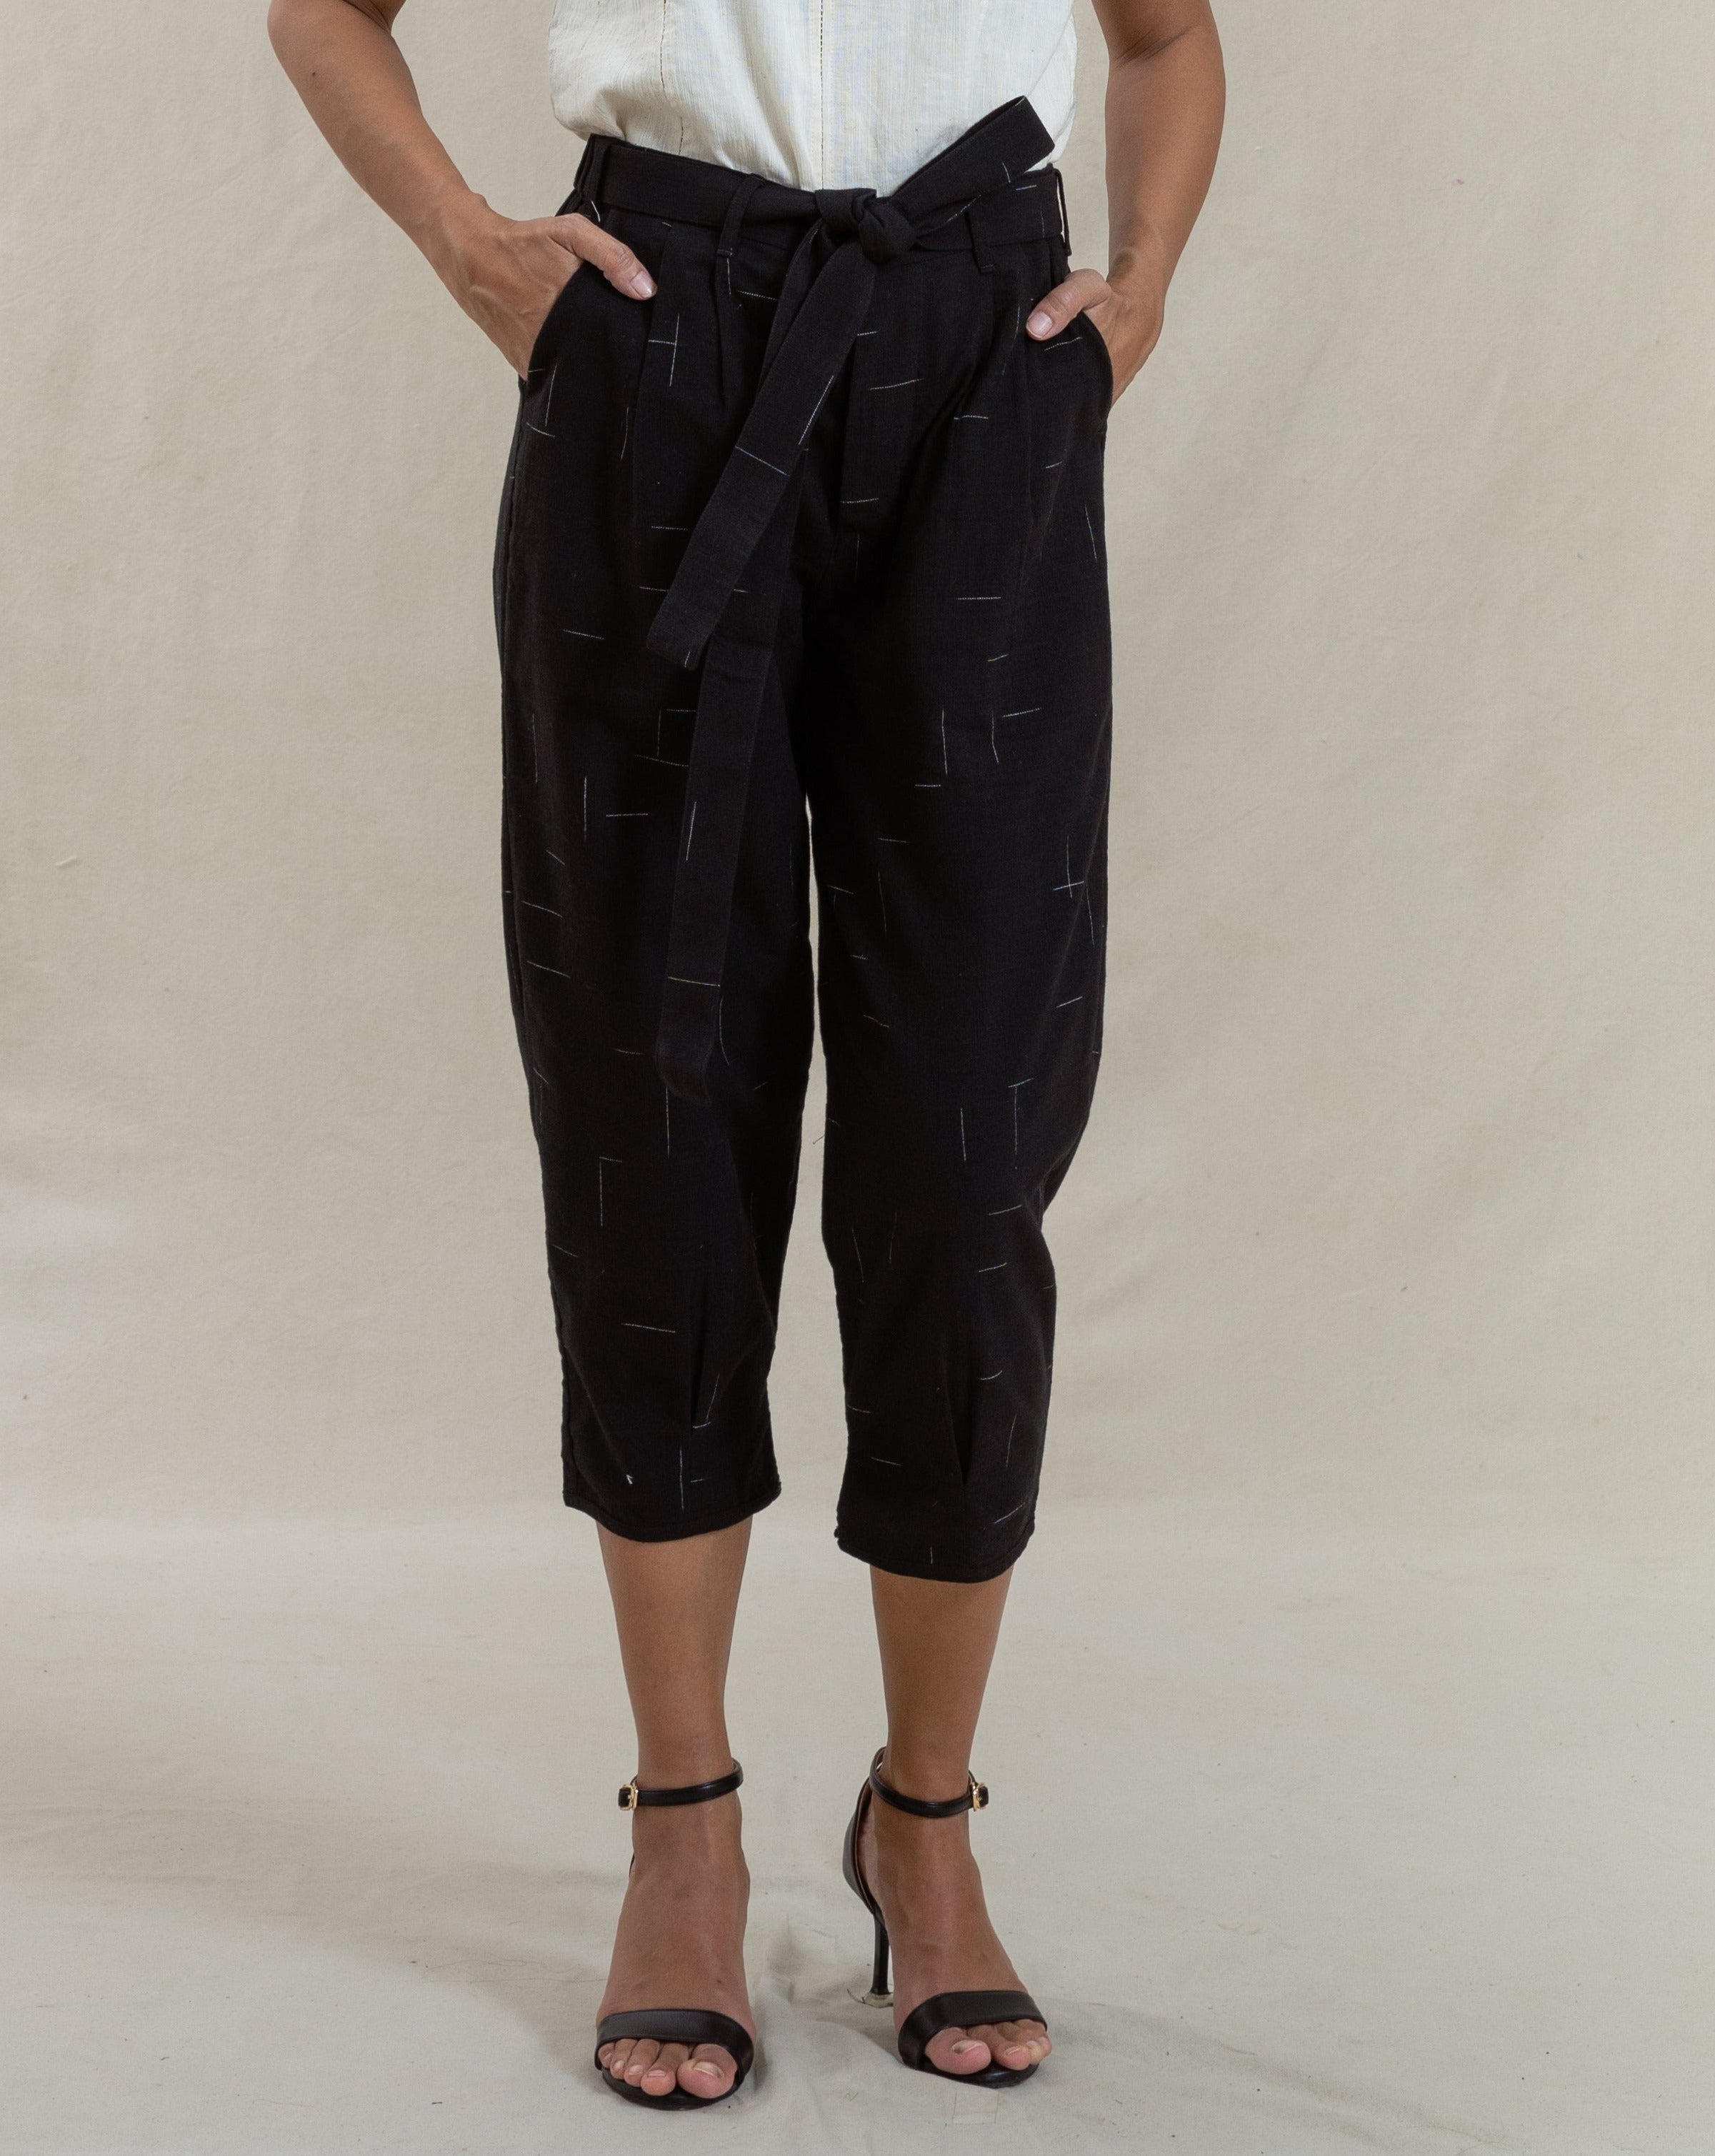 pants, women's pants, pants for traveling, women's fashion, handwoven, handcrafted, naturally dyed, slow fashion